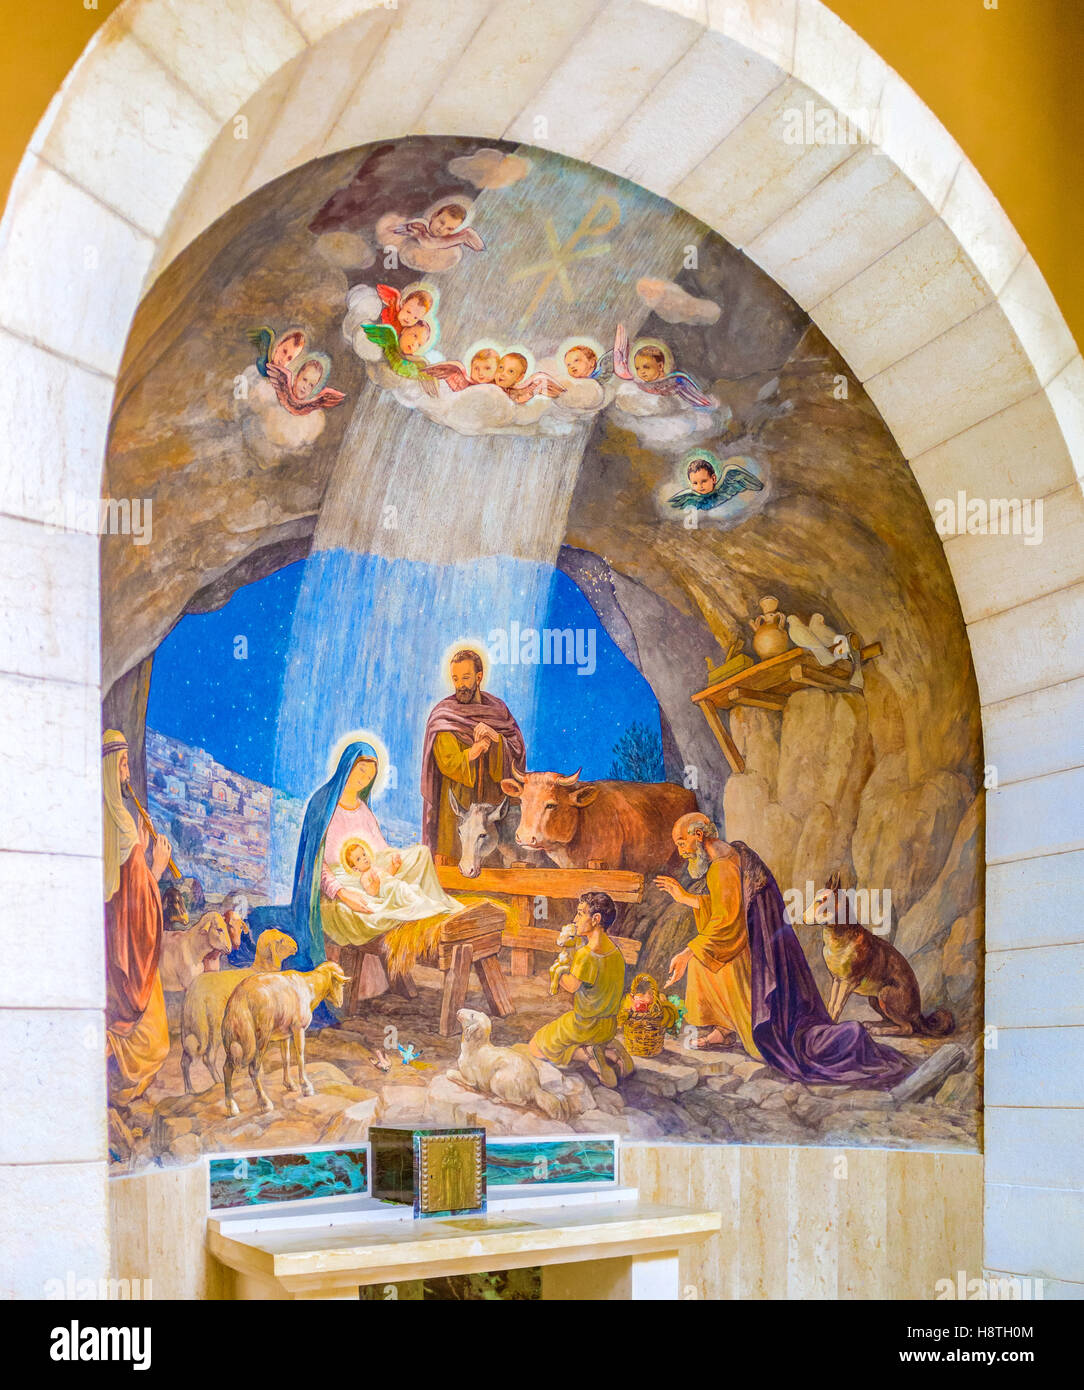 The fresco depicting a biblical scene of adoration of the shepherds Stock Photo